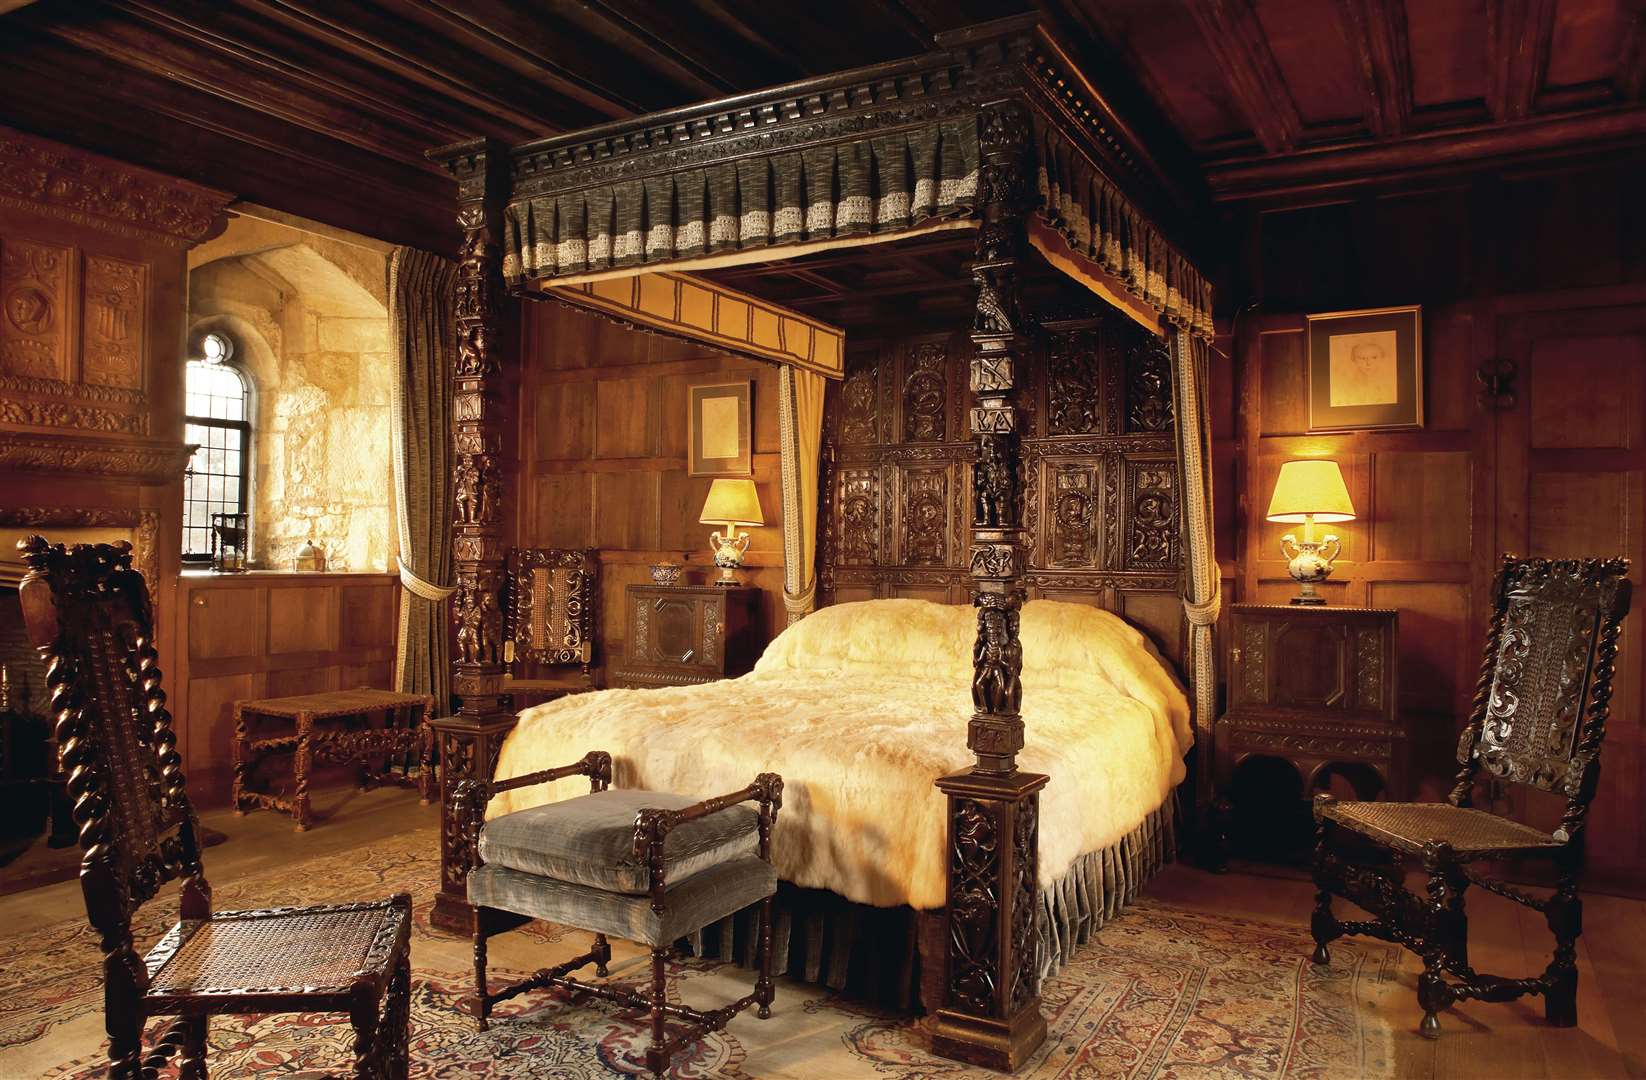 The bedroom Henry VIII slept in at Hever Castle Picture: Hever Castle and Gardens